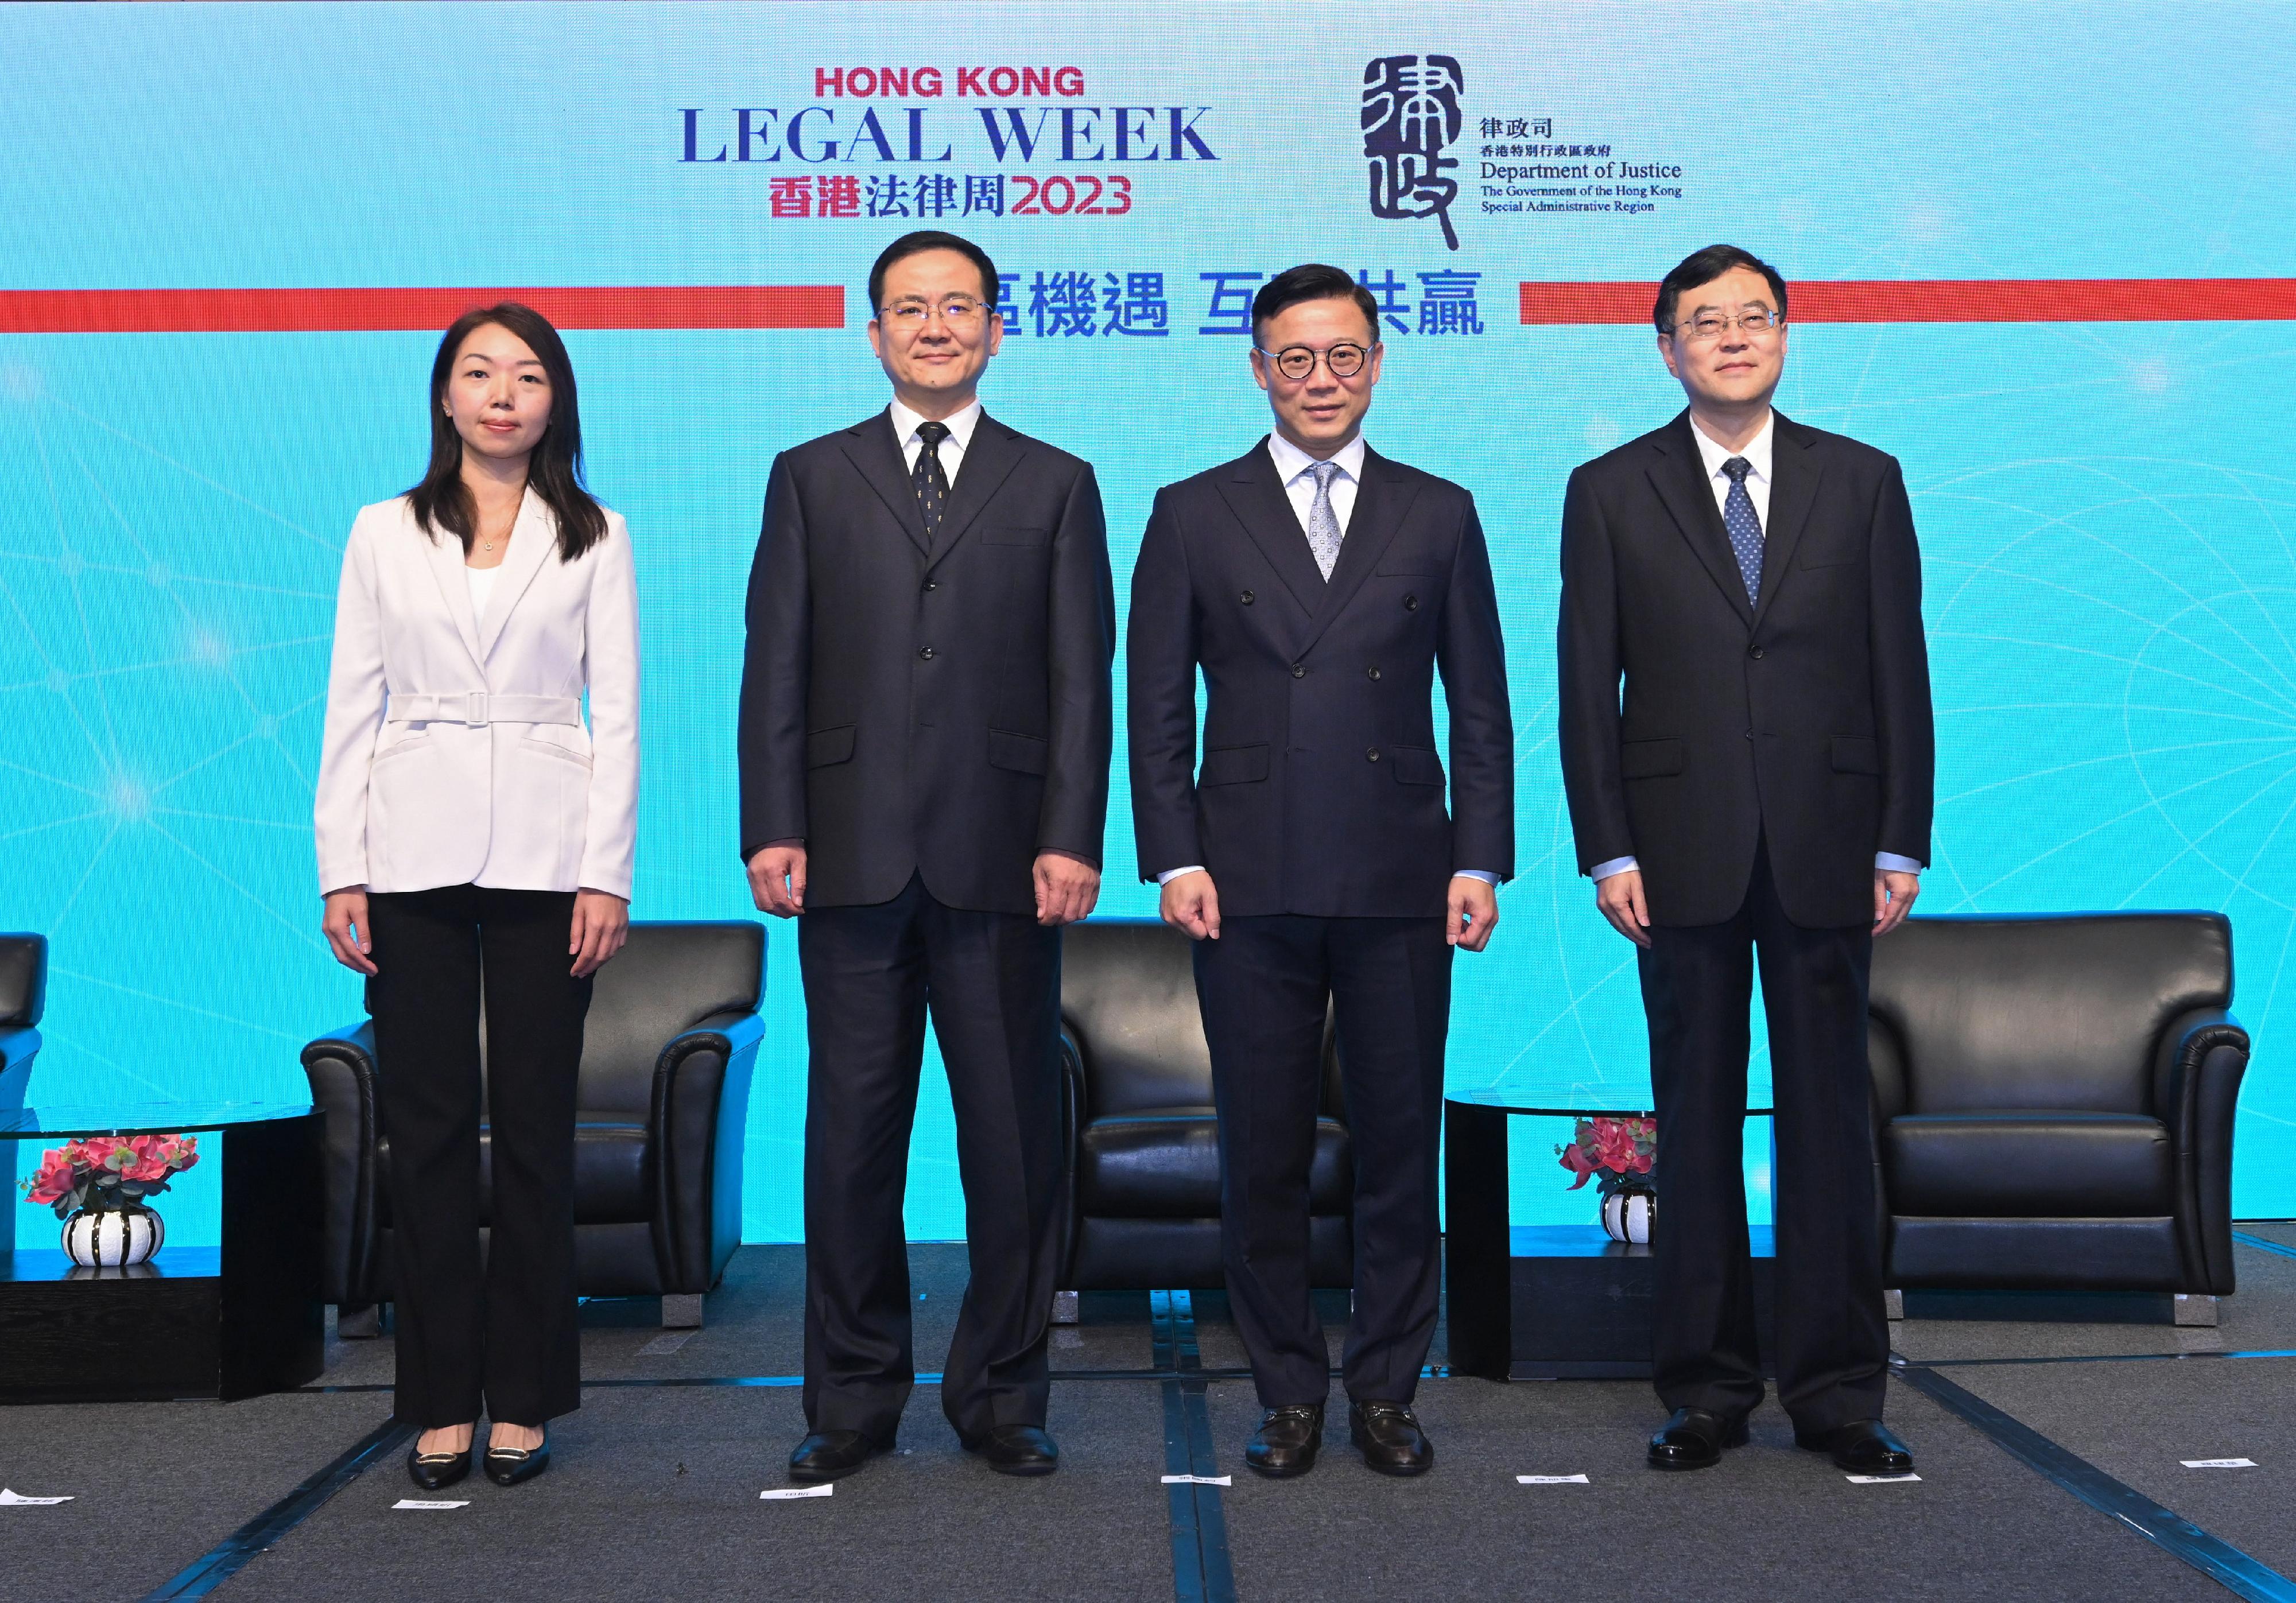 The Deputy Secretary for Justice, Mr Cheung Kwok-kwan (second right); the Director-General of the Department of Justice of Guangdong Province, Mr Chen Xudong (first right); the Director of the Legal Affairs Bureau of the Government of the Macao Special Administrative Region, Ms Leong Weng In (first left); and the Director of the Bureau of Lawyers' Work of the Ministry of Justice, Mr Tian Xin (second left), are pictured at the Gateway to the Opportunities in the GBA under the Hong Kong Legal Week 2023 today (November 9).